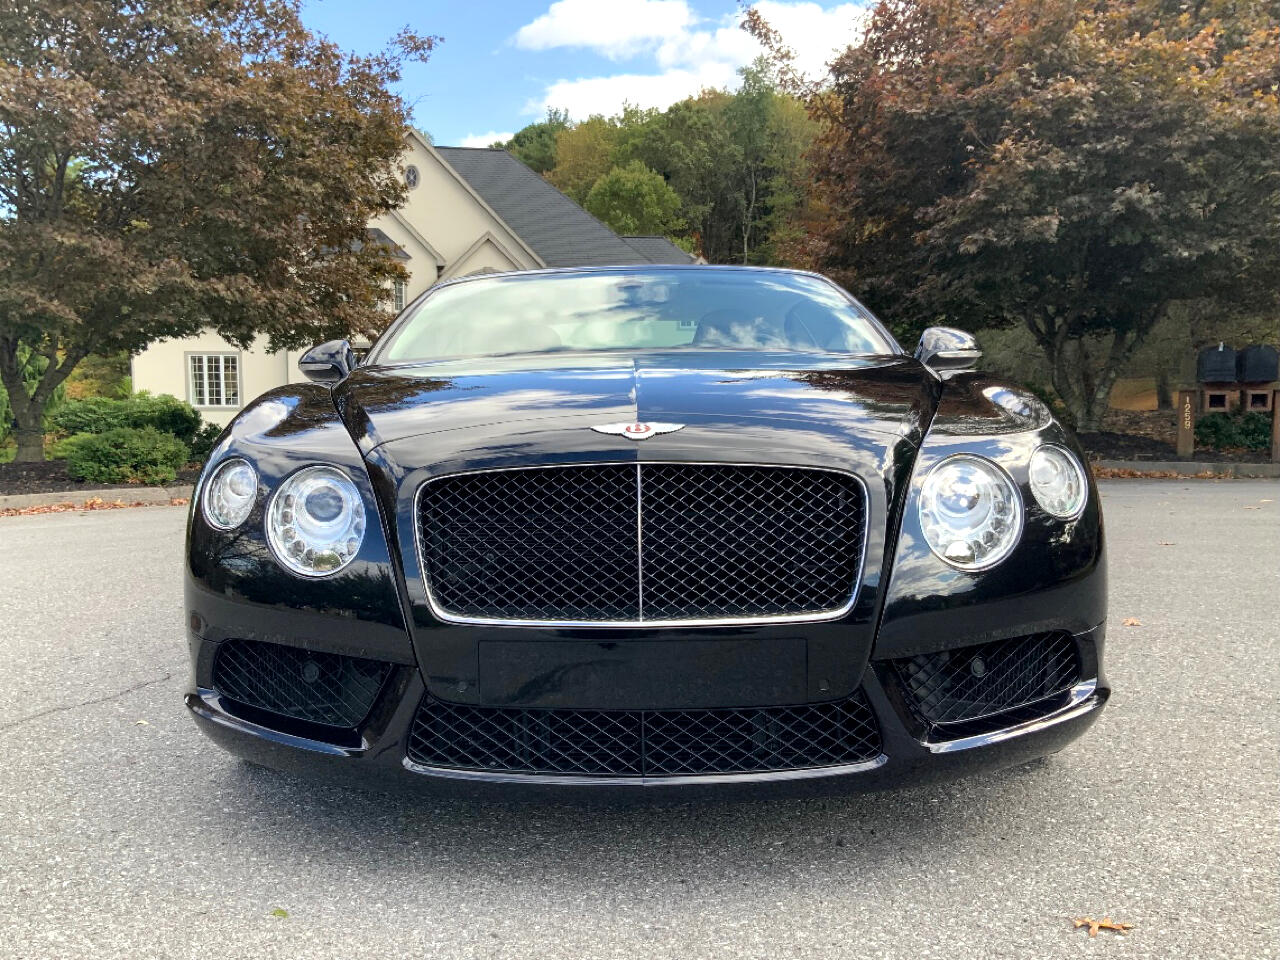 Used 14 Bentley Continental Gt V8 2dr Conv For Sale In Williamsport Pa Pro Auto Sales